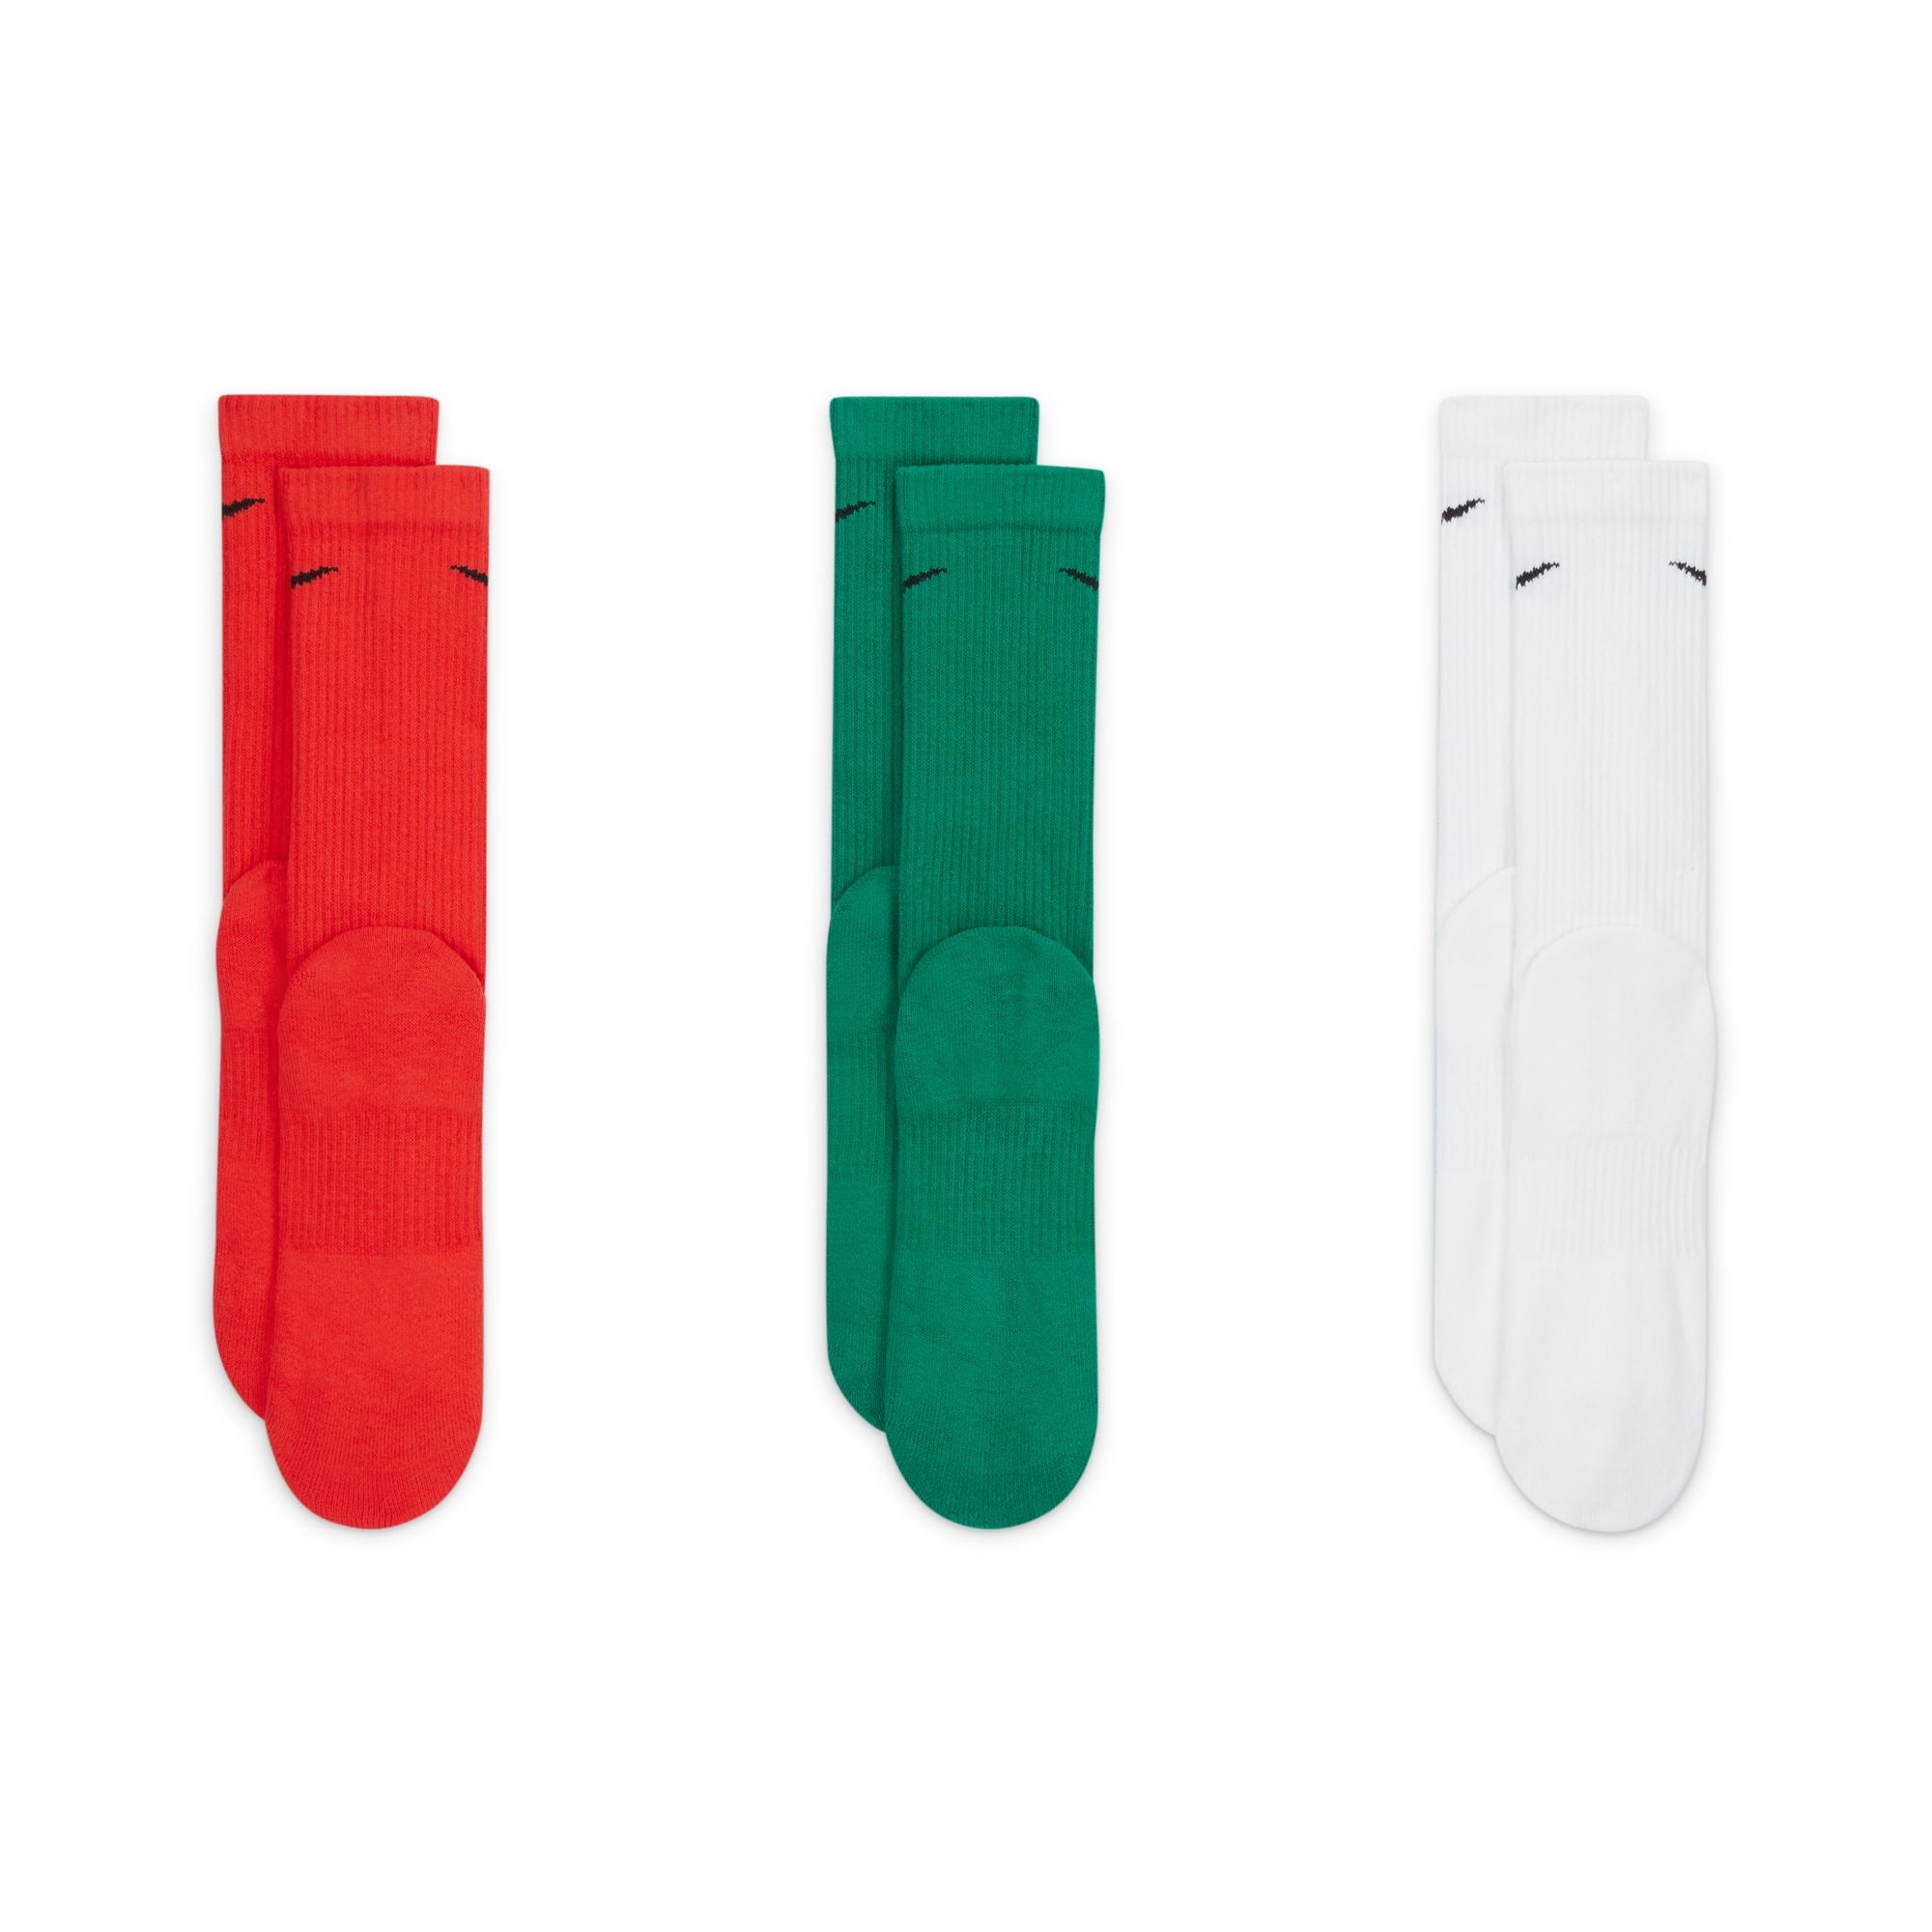 Nike Everyday Plus Cushioned Crew Socks - Red Green White Multicolour 3 Pack